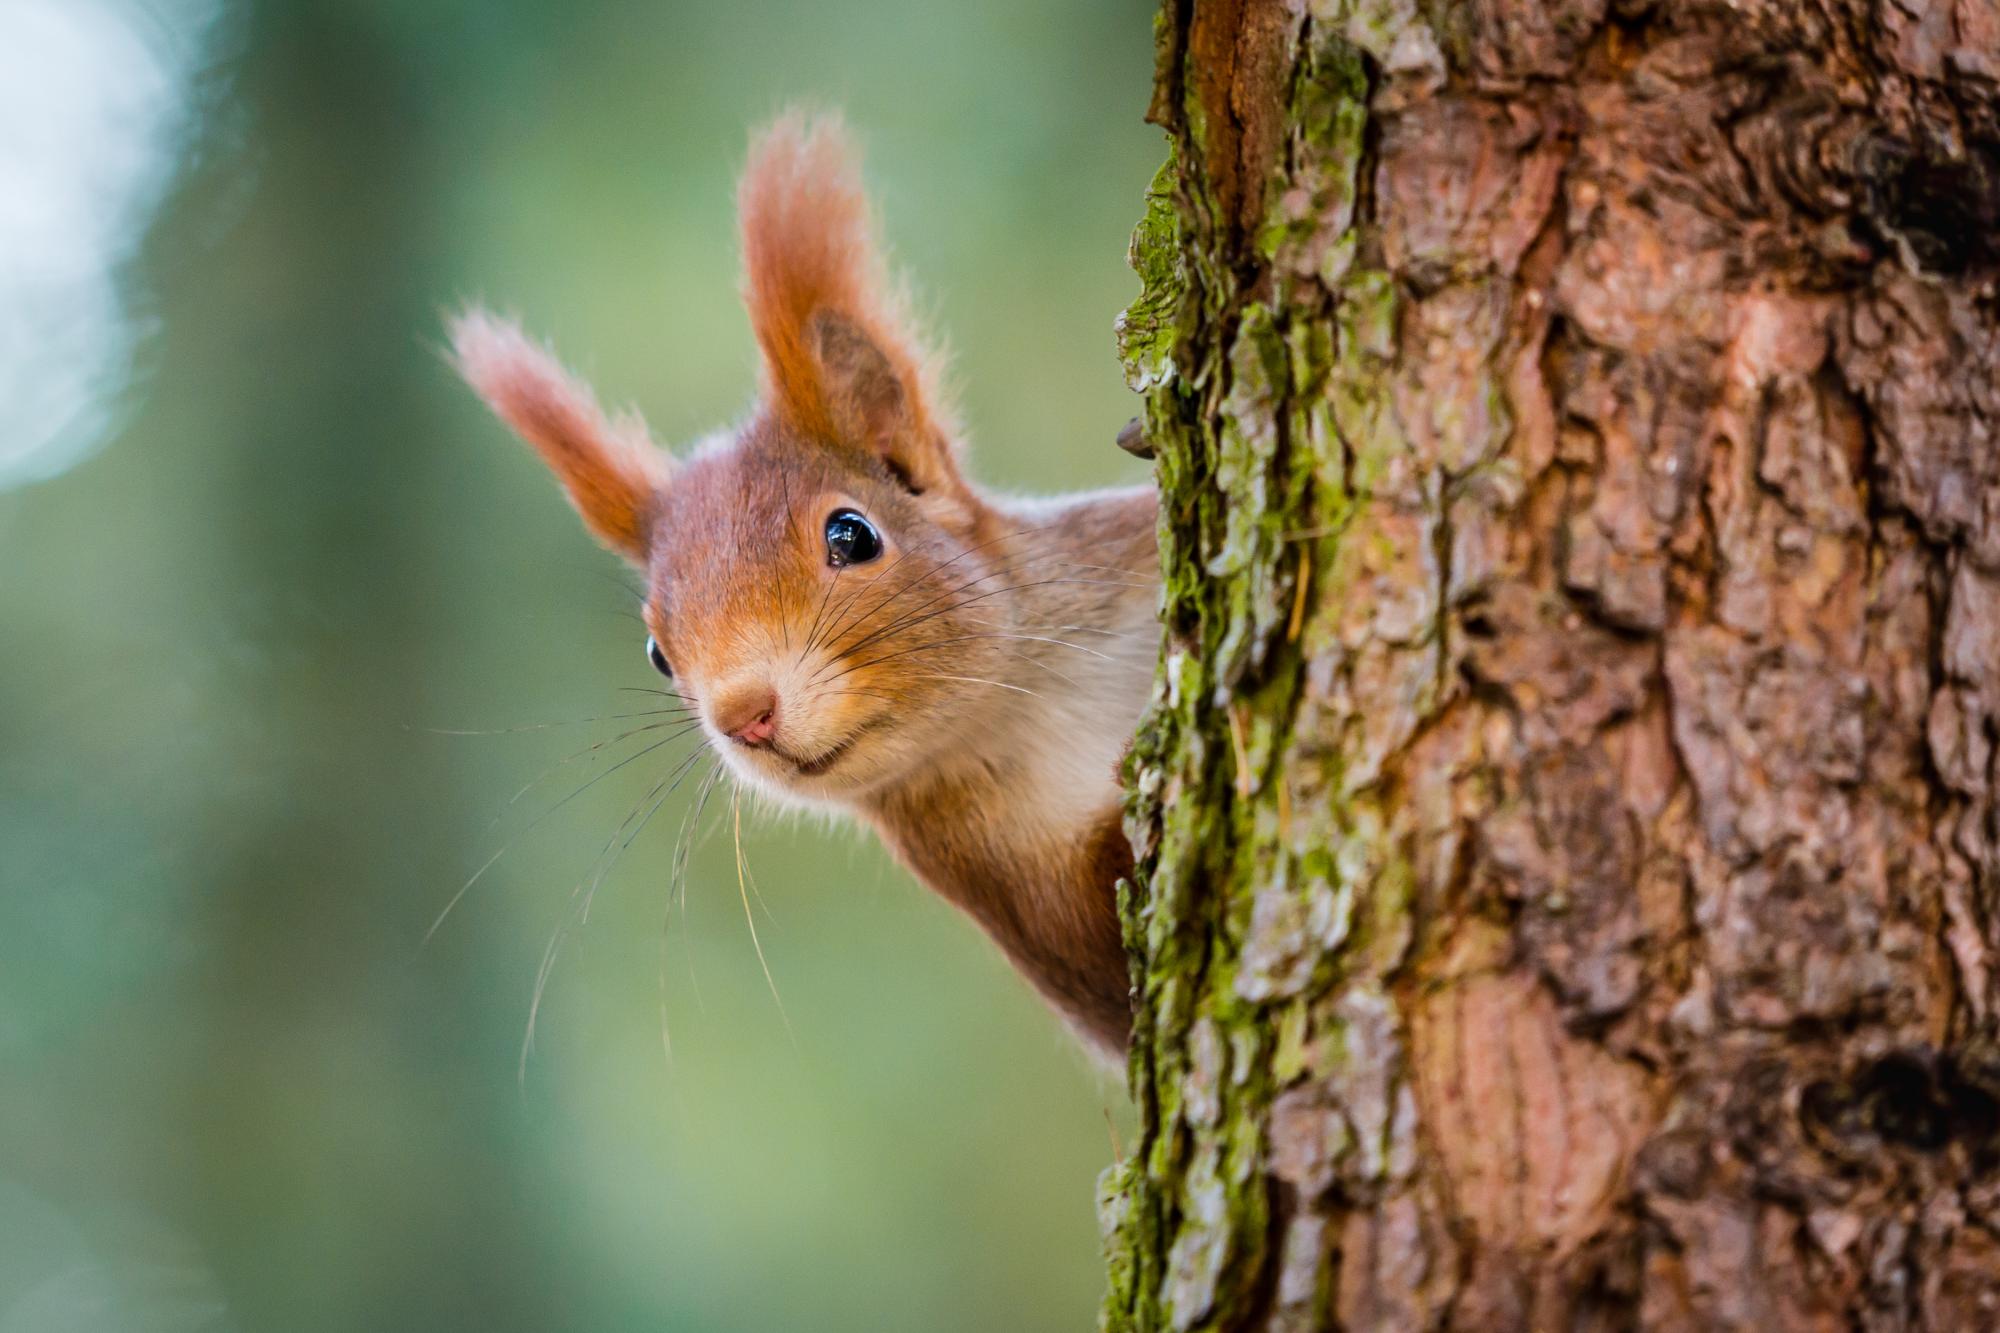 Curious red squirrel peeking behind the tree trunk Adobe Stock for Make Space For Nature campaign